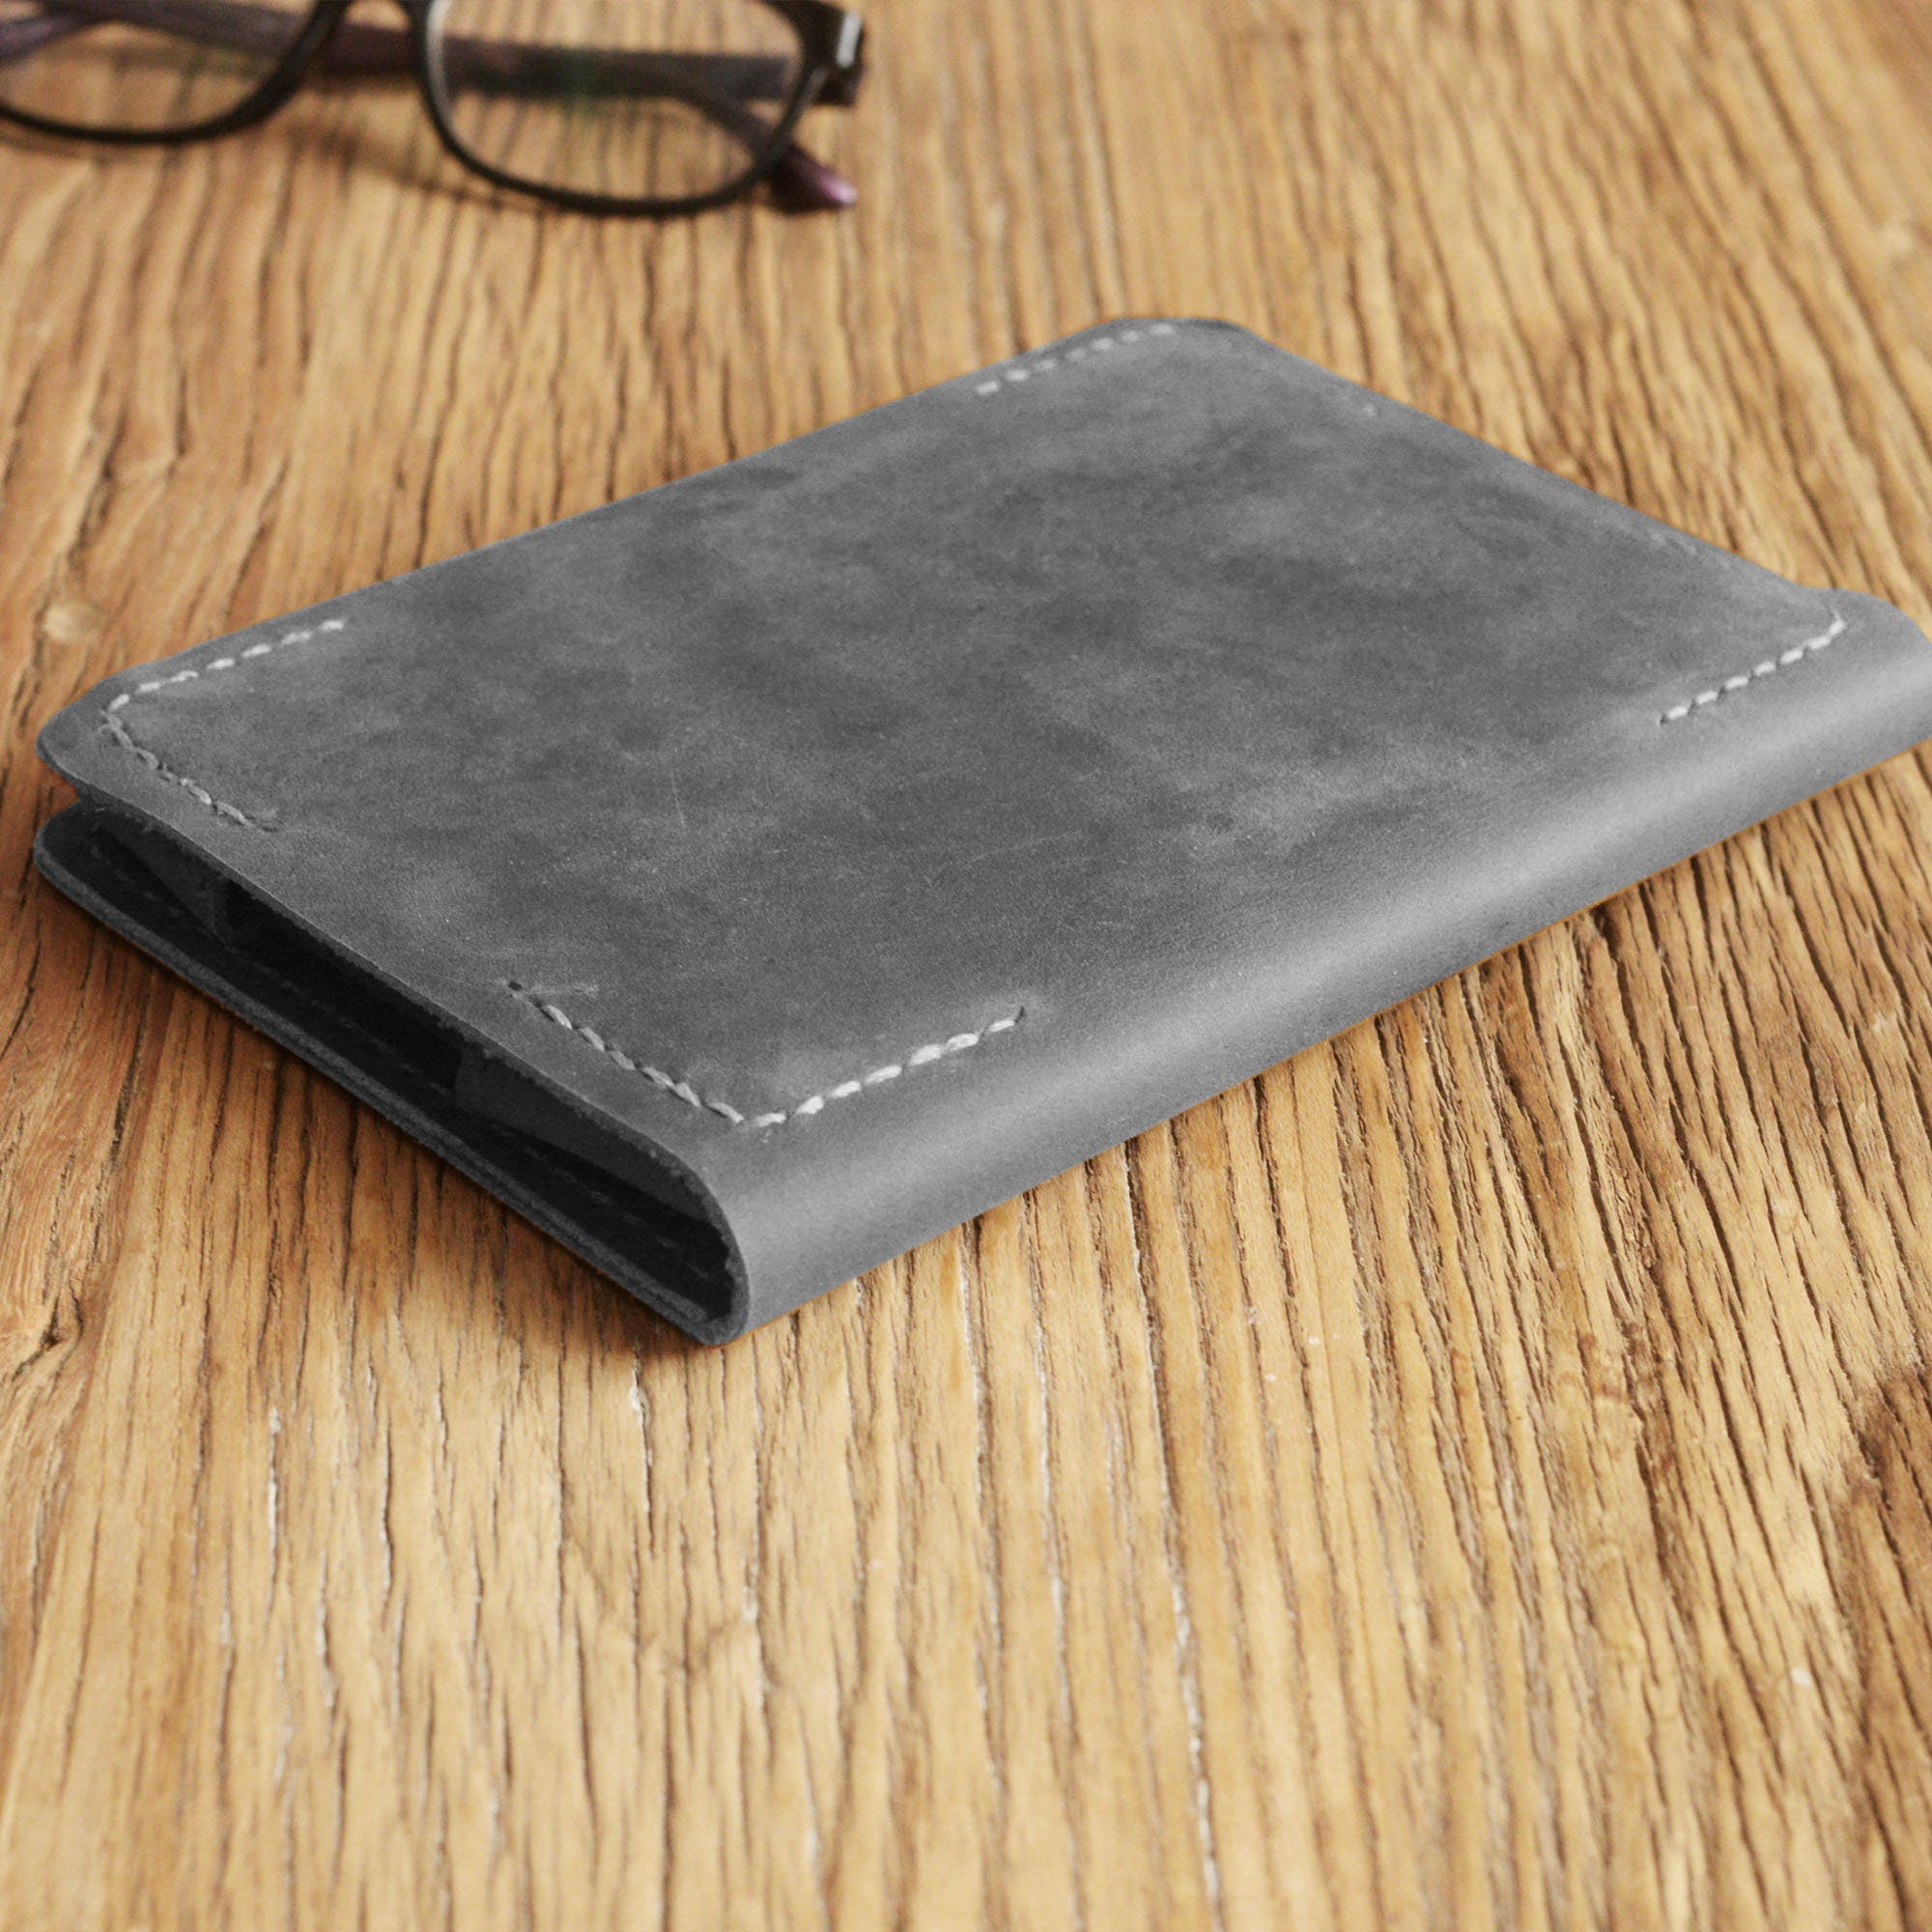 Personalized Leather kindle paperwhite case 11th gen, Kindle paperwhit -  Extra Studio